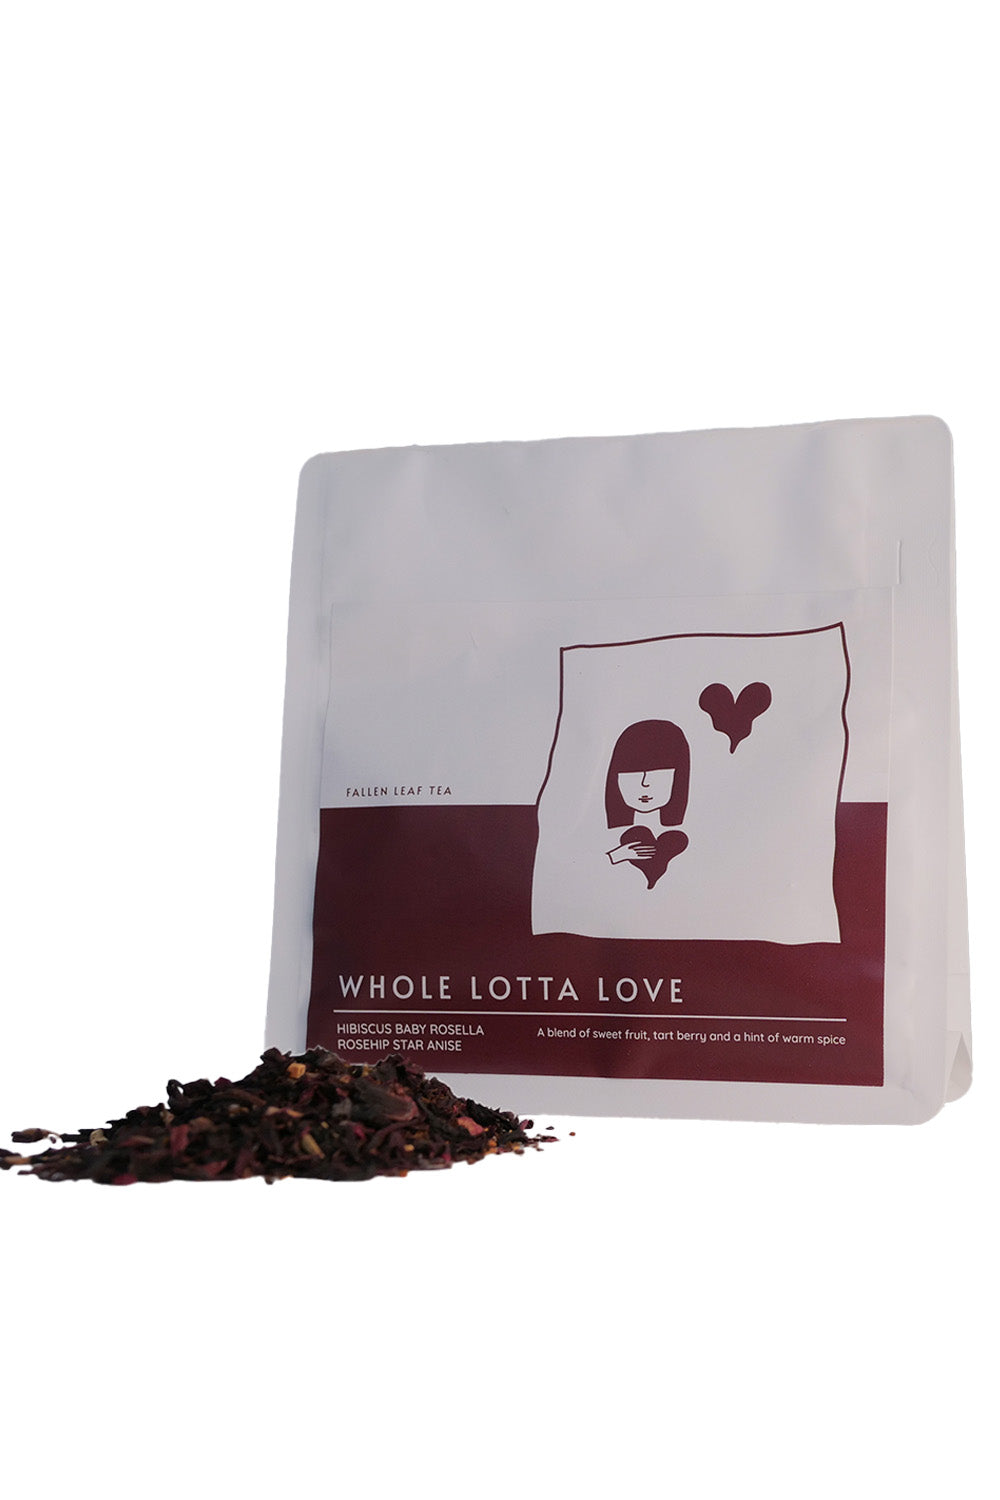 A bag of tea Hibiscus, Baby Rosella, Rosehip & Star Anise. A belnd of sweet fruit, tart berry and a hint of warm spice. 